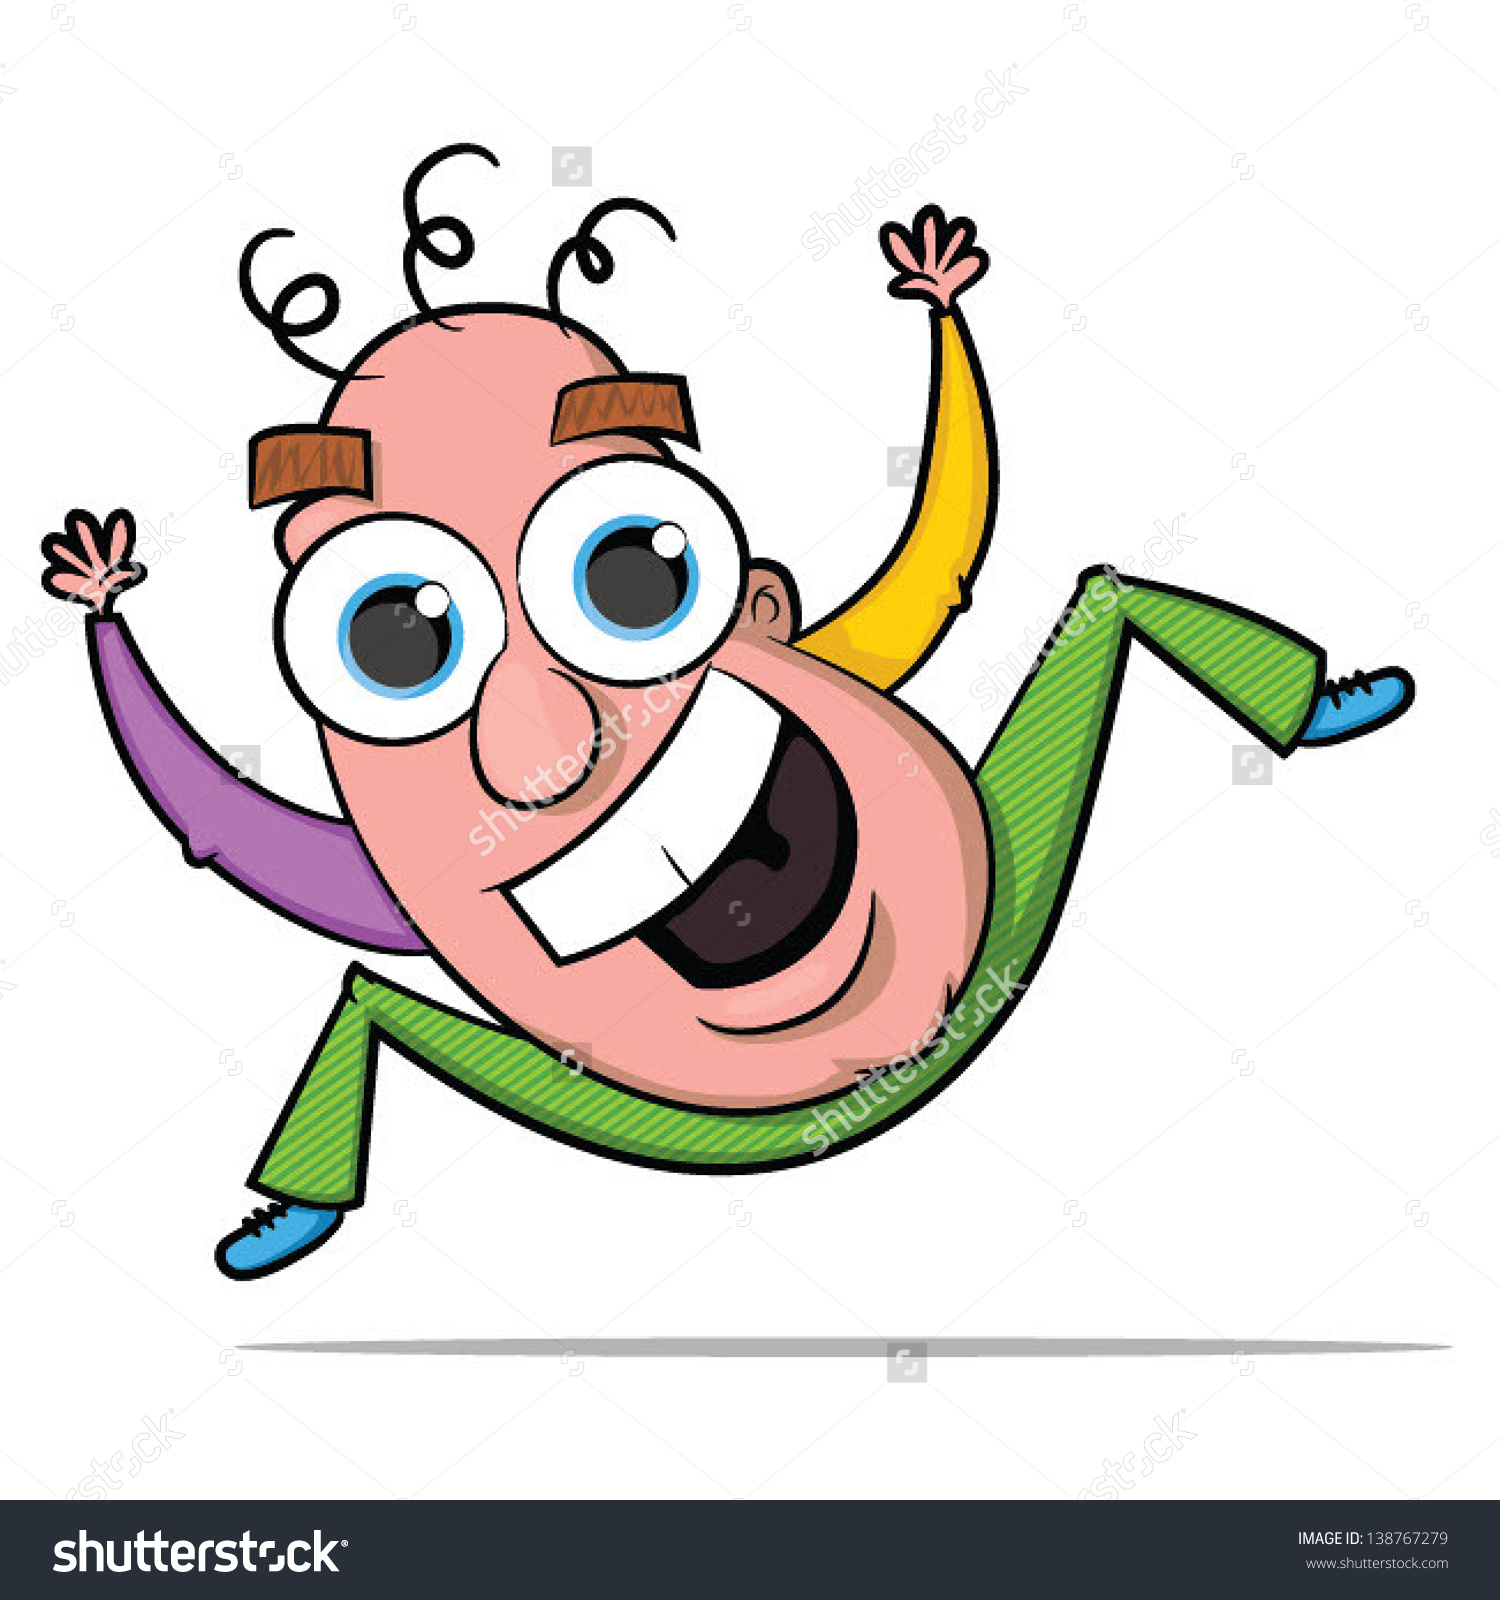 animated excitement clipart - Clipground